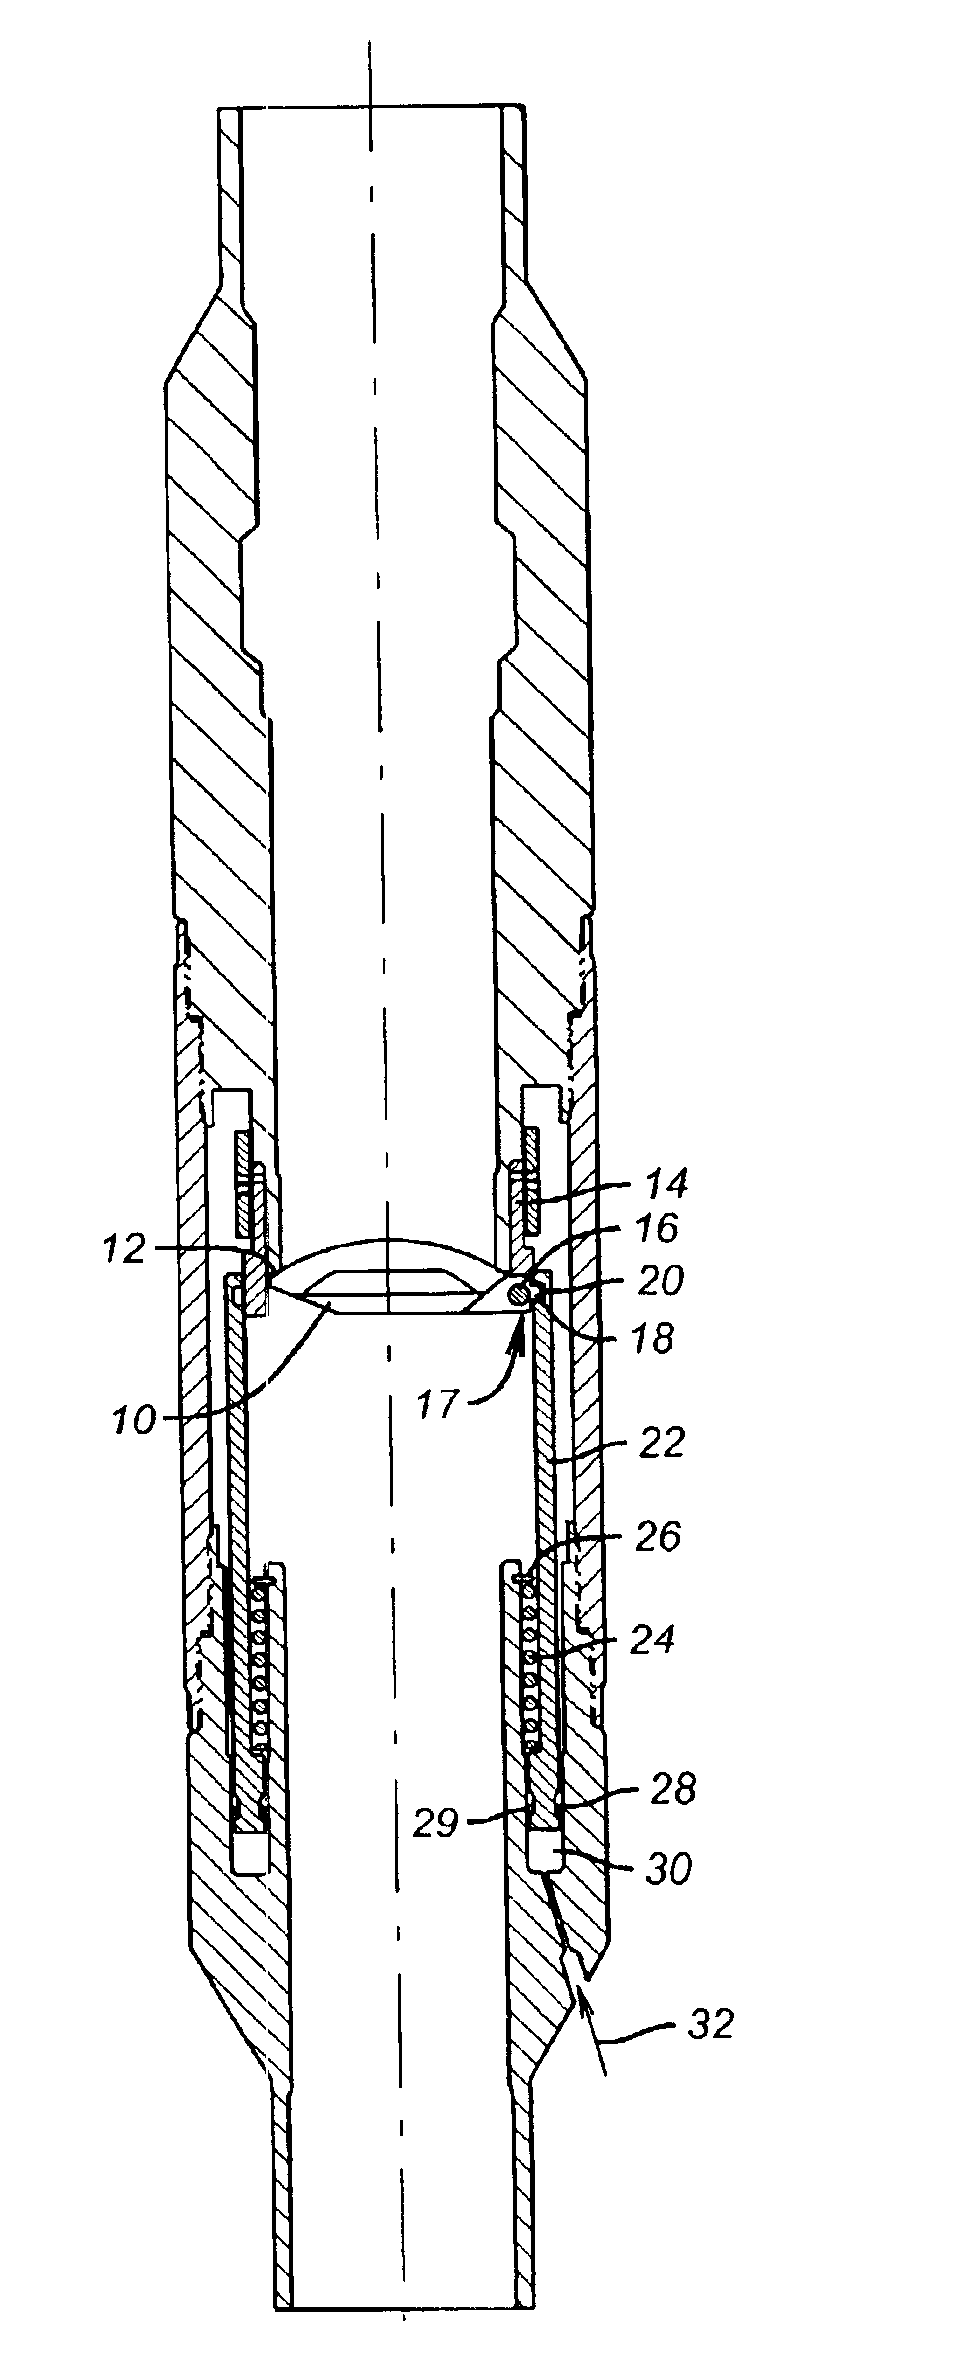 Closure mechanism with integrated actuator for subsurface valves